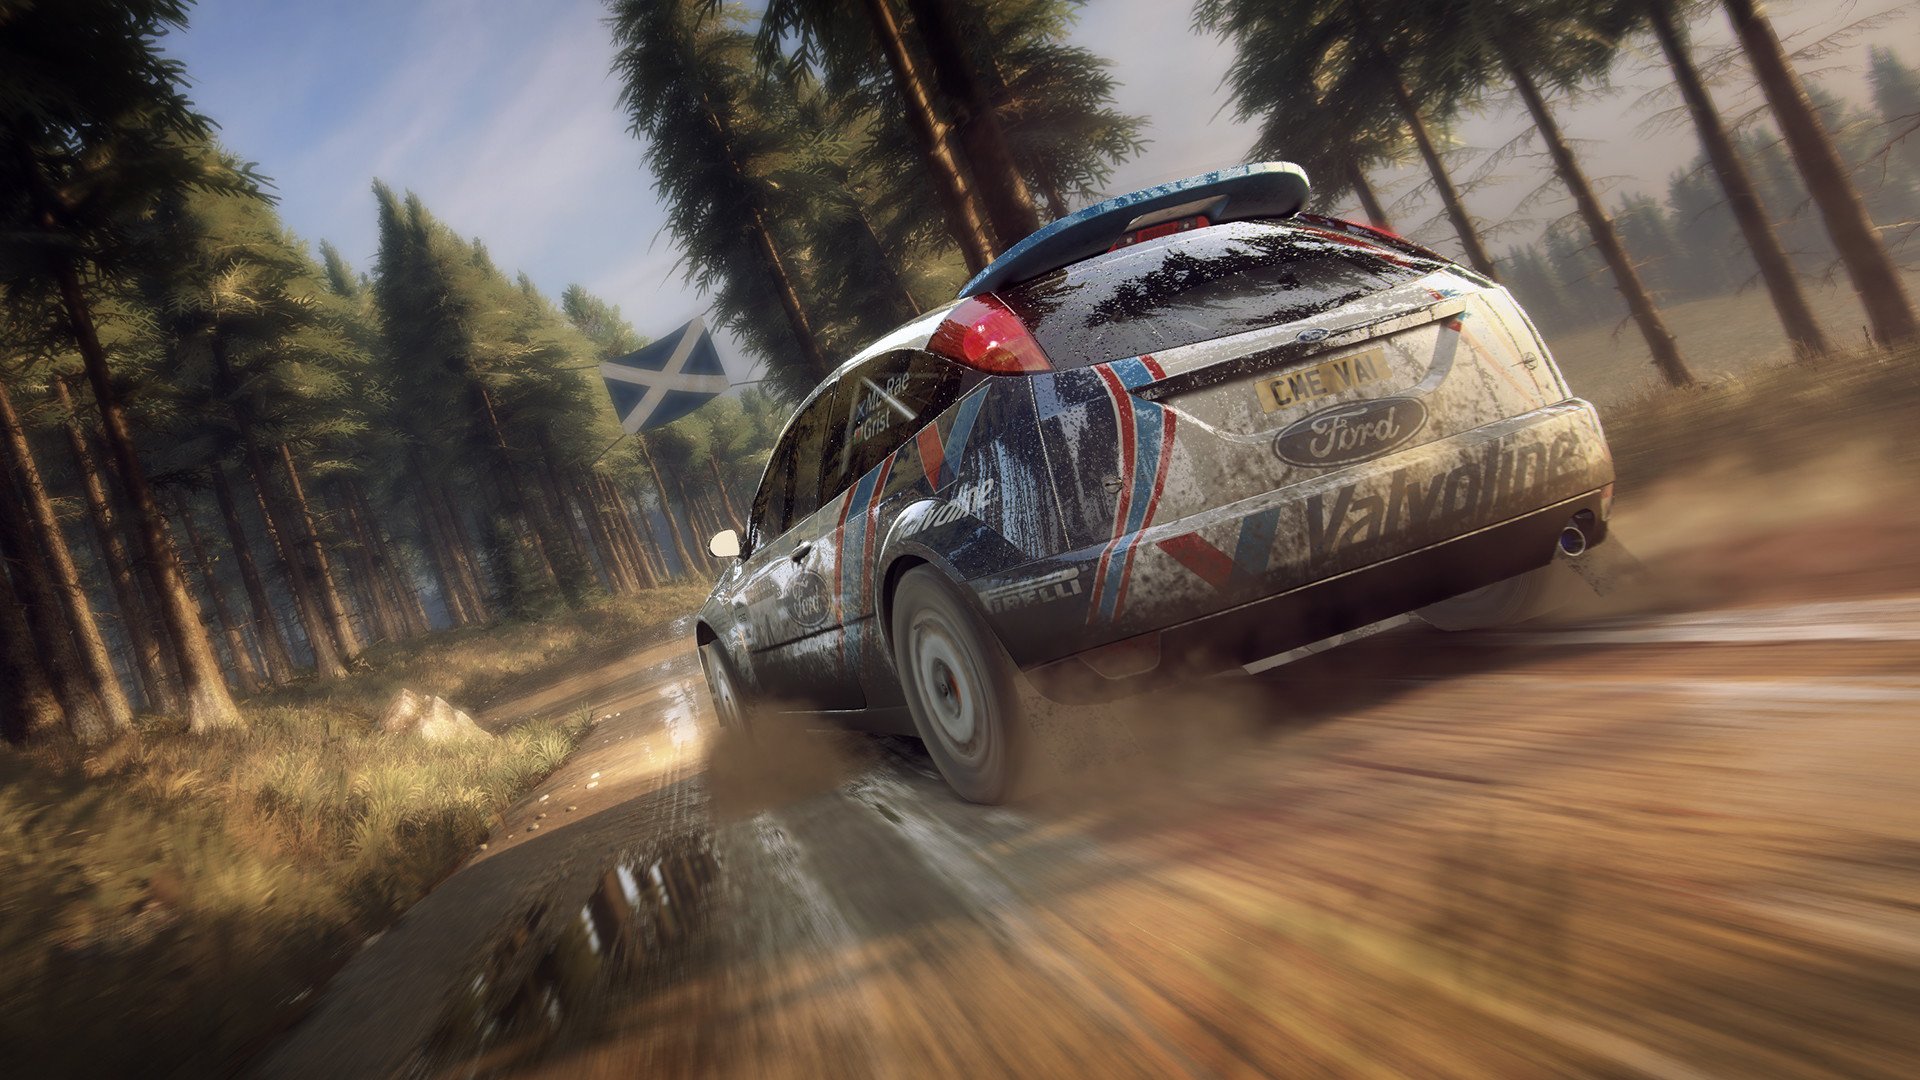 Скриншот 3 к игре DiRT Rally 2.0 Game of the Year Edition v. 1.18.0 (2019)